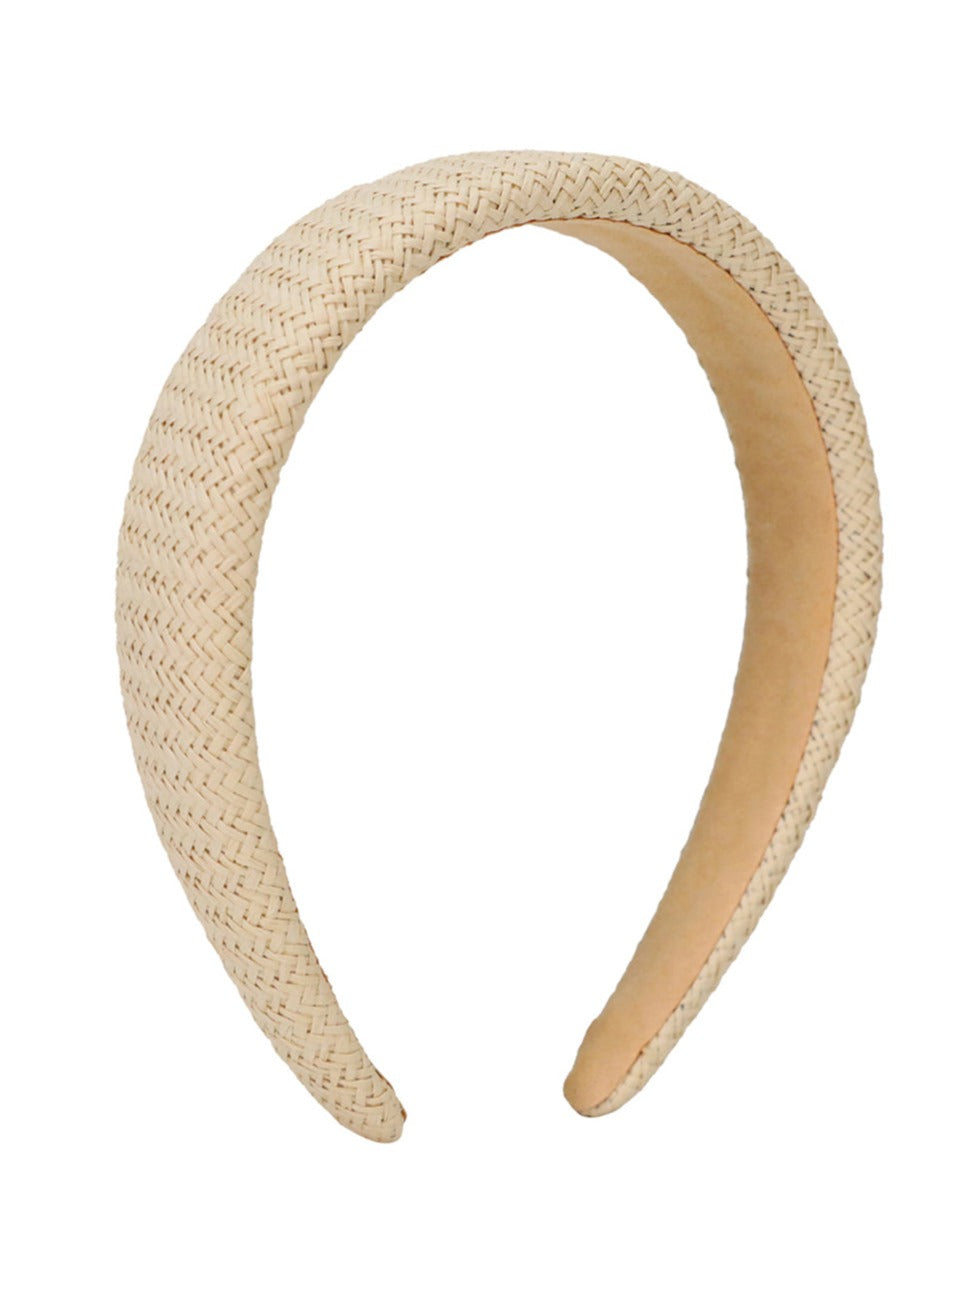 Woven Rounded Headband In Beige – My Accessories London